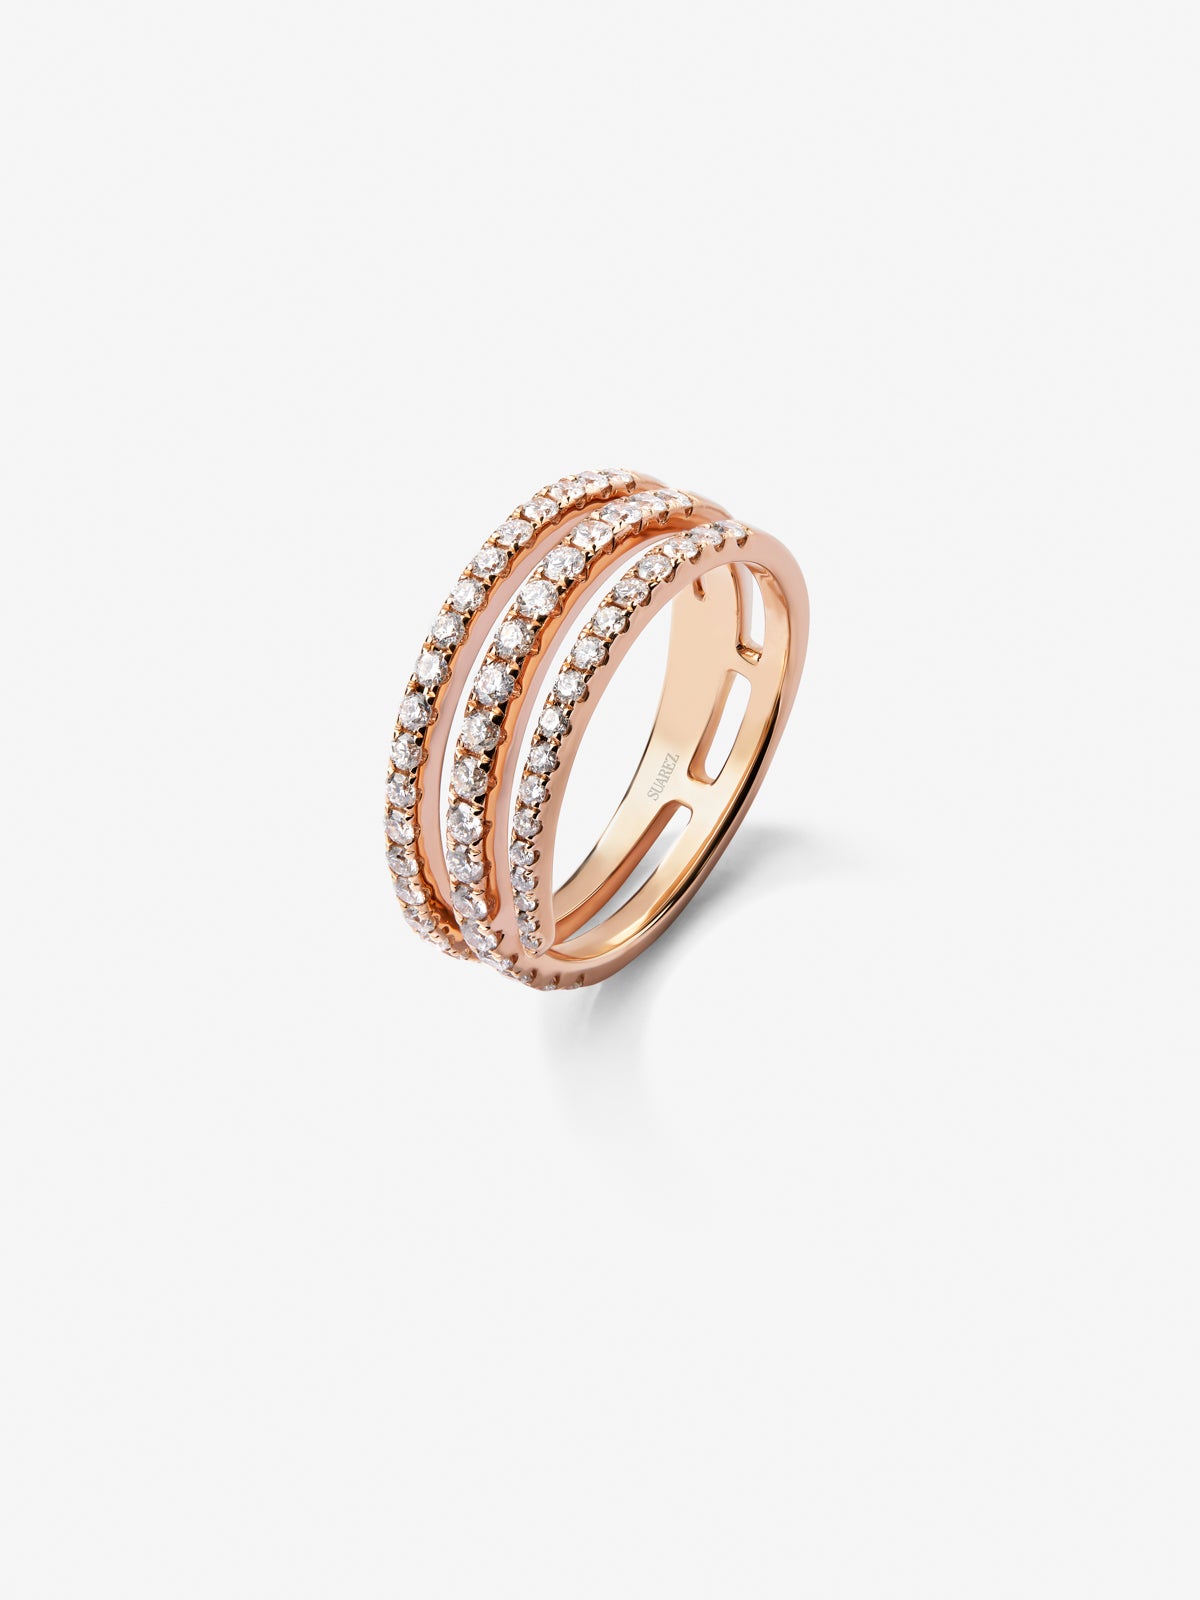 18K rose gold triple ring with 55 brilliant-cut diamonds with a total of 0.68 cts